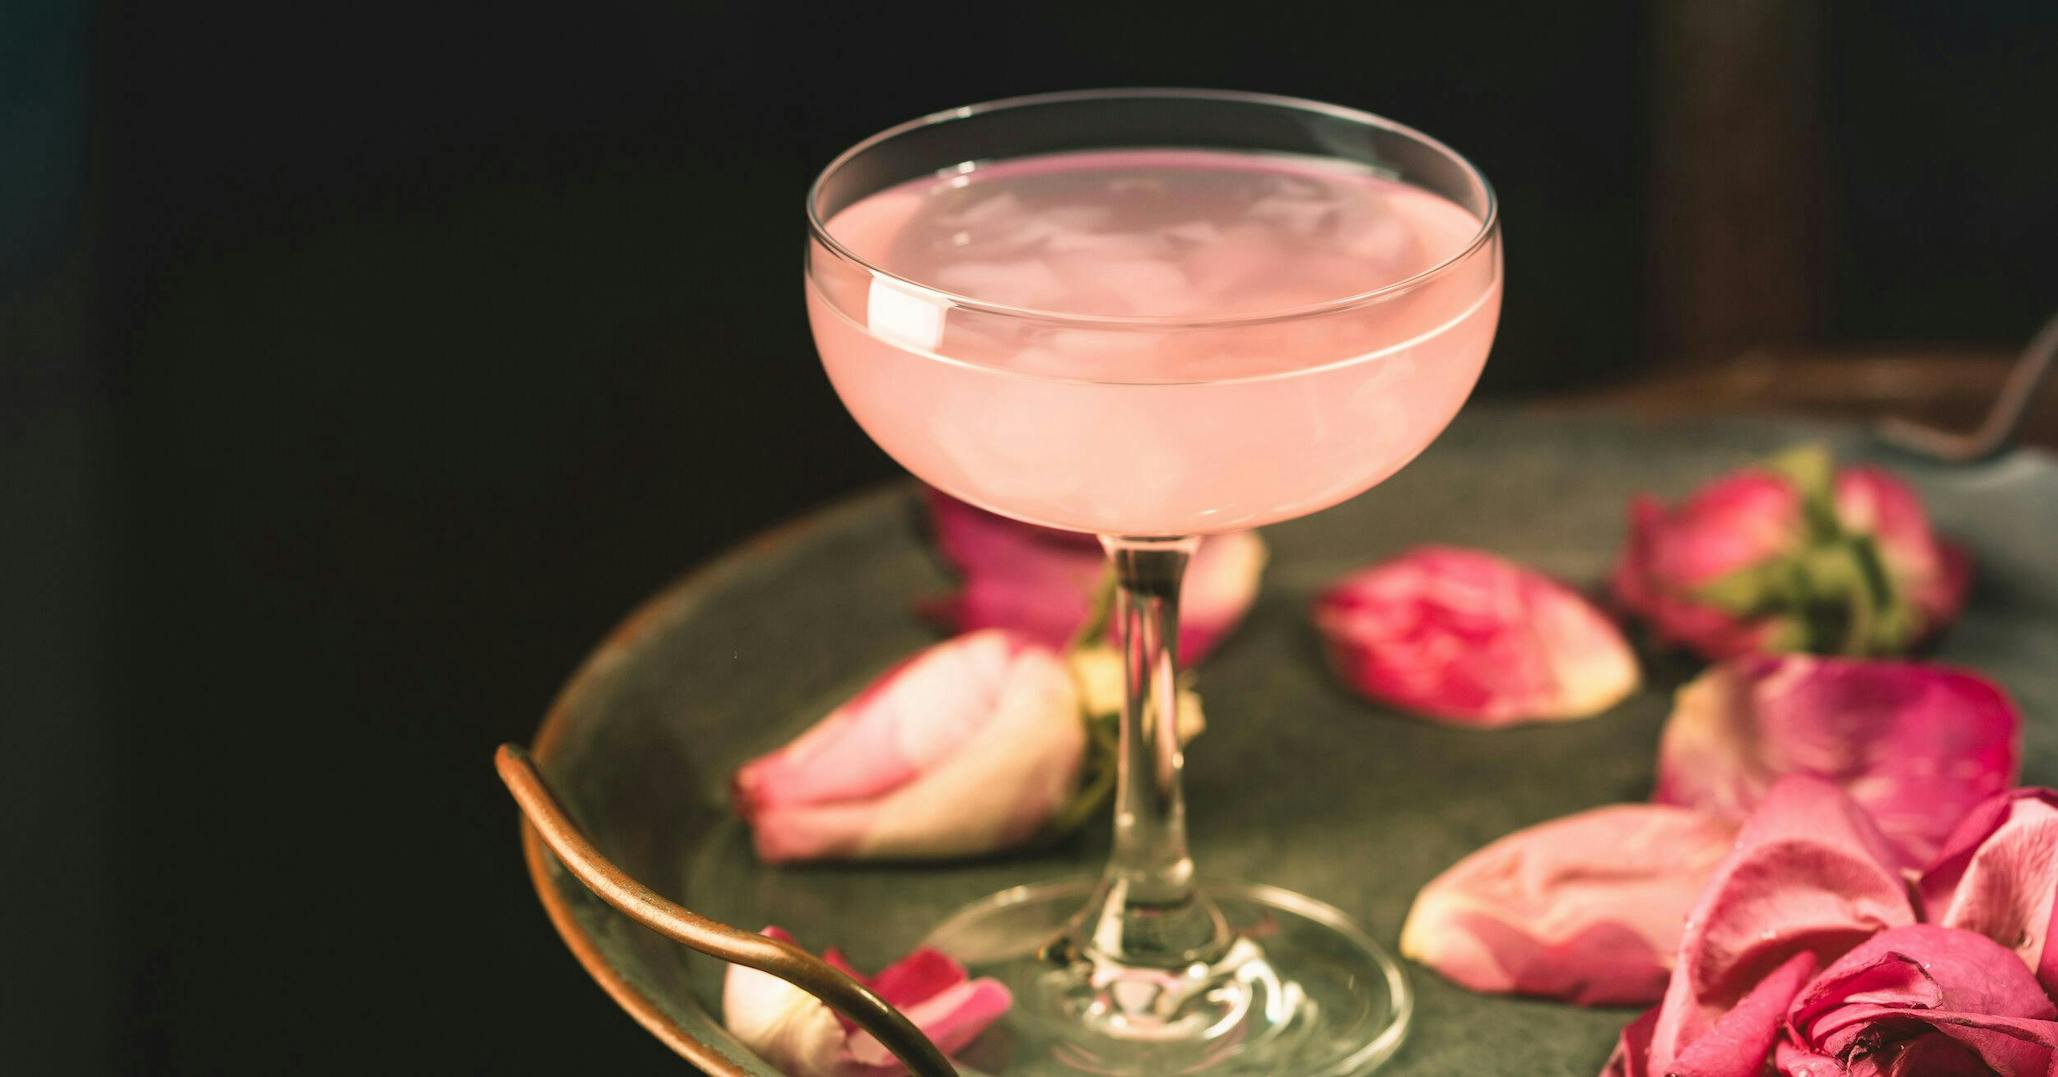 Is this pretty Rose Petal Martini as sweet and innocent as it looks? (Hint: nope!)